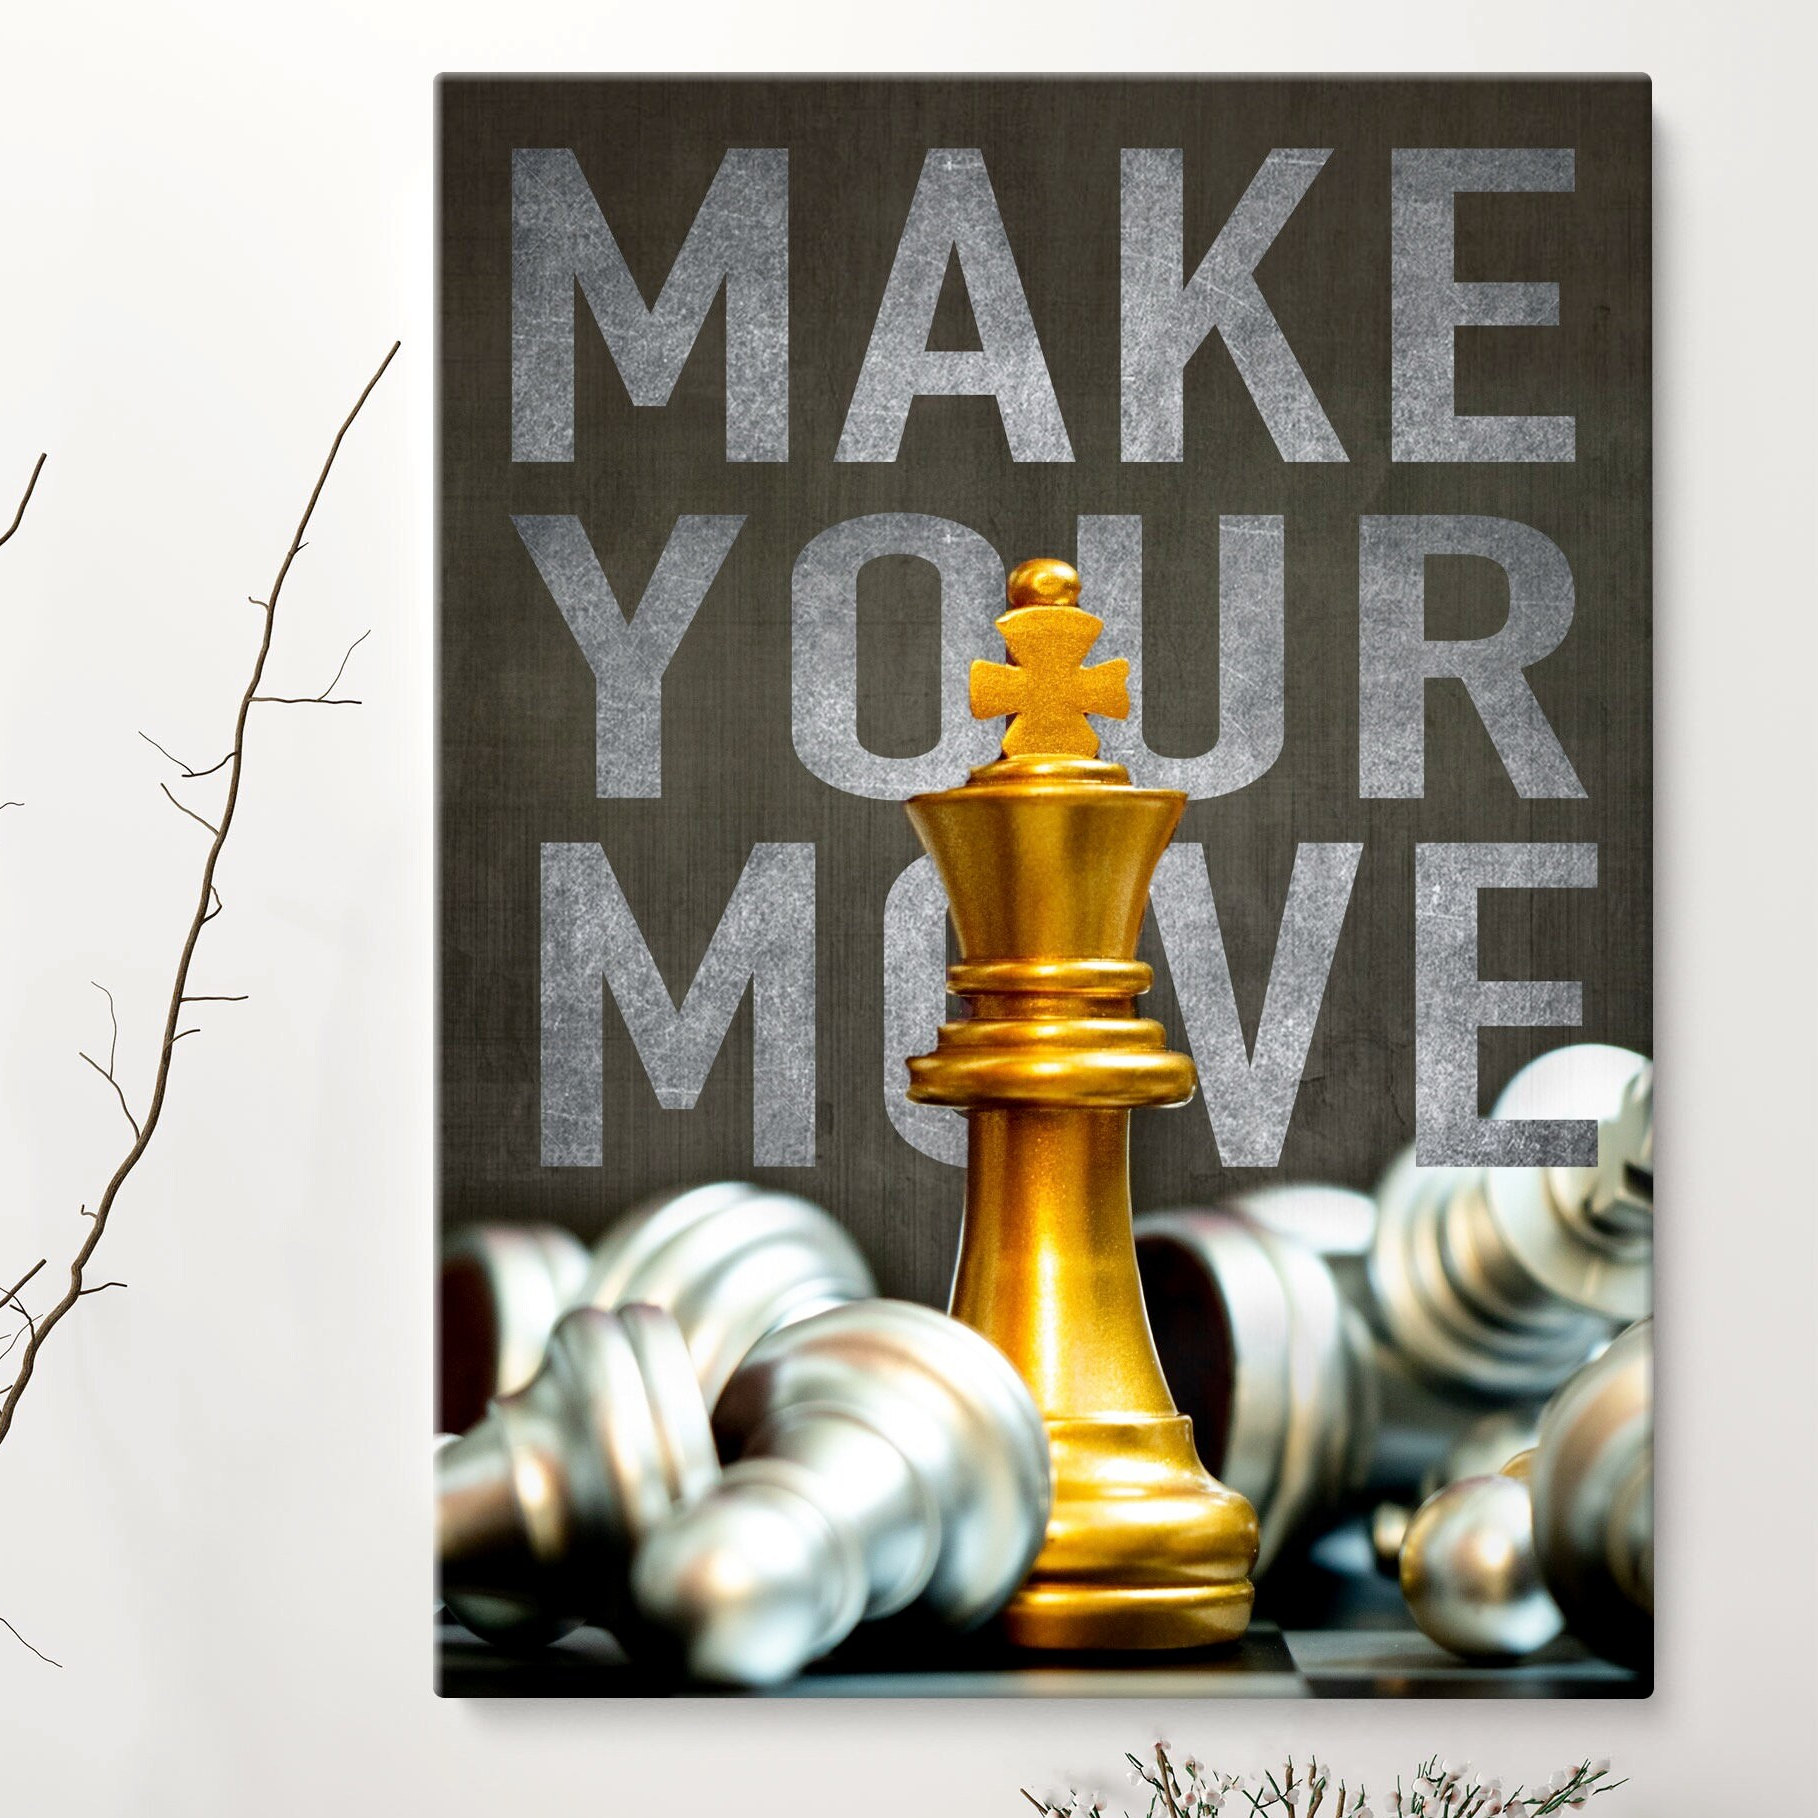 Chess Game Match Motivational Poster Art Print Think Quote Classroom Wall  Decor